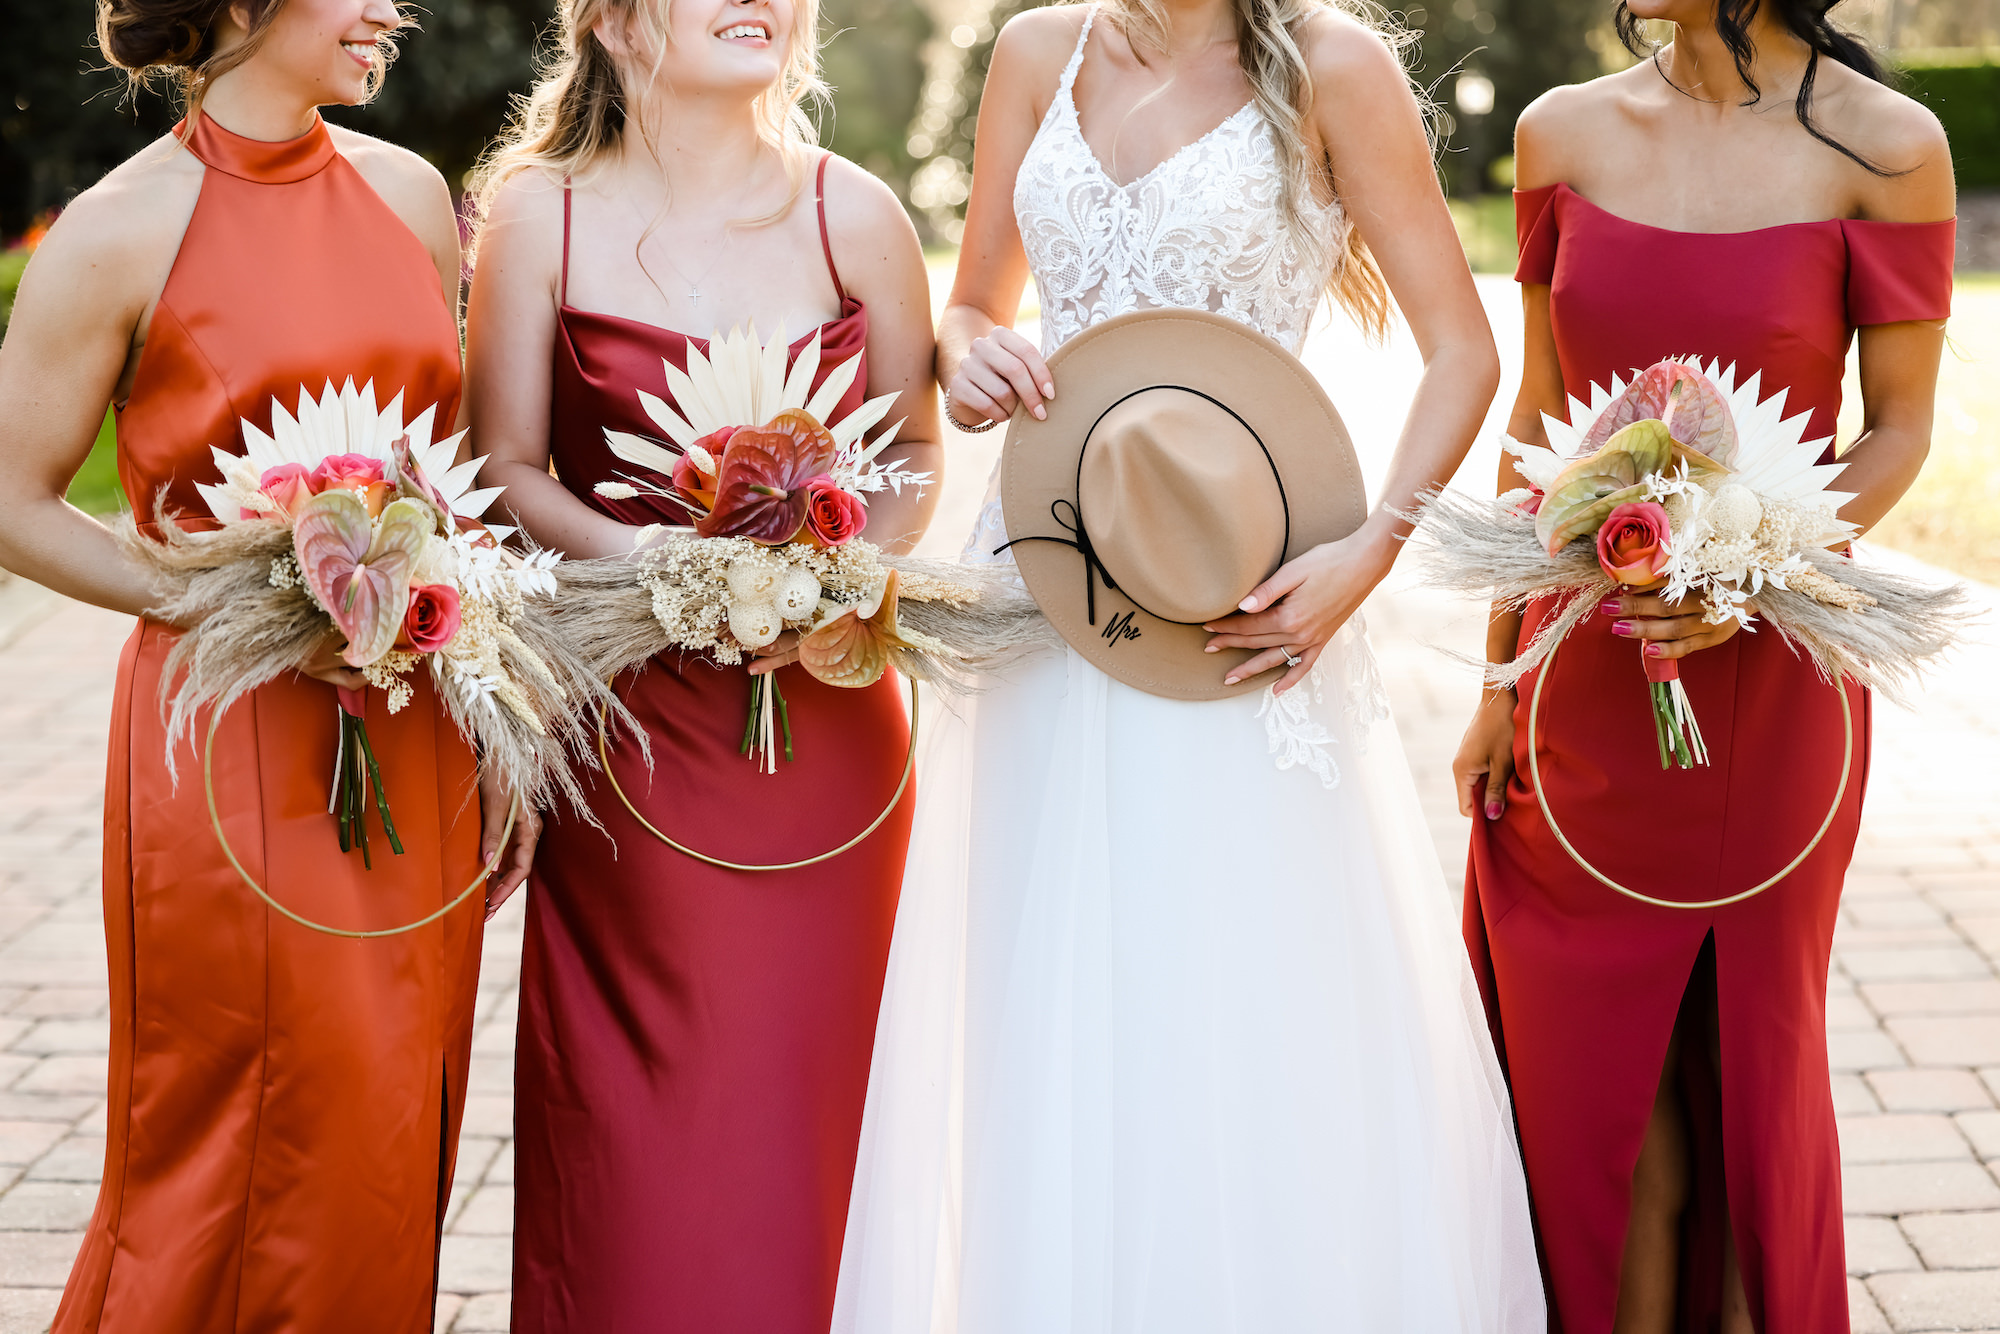 Bride with Bridesmaids in Fall Reds and Orange Mix and Match Floor Length Dresses and Modern Boho Circle Wedding Bouquets | Bella Bridesmaids Tampa